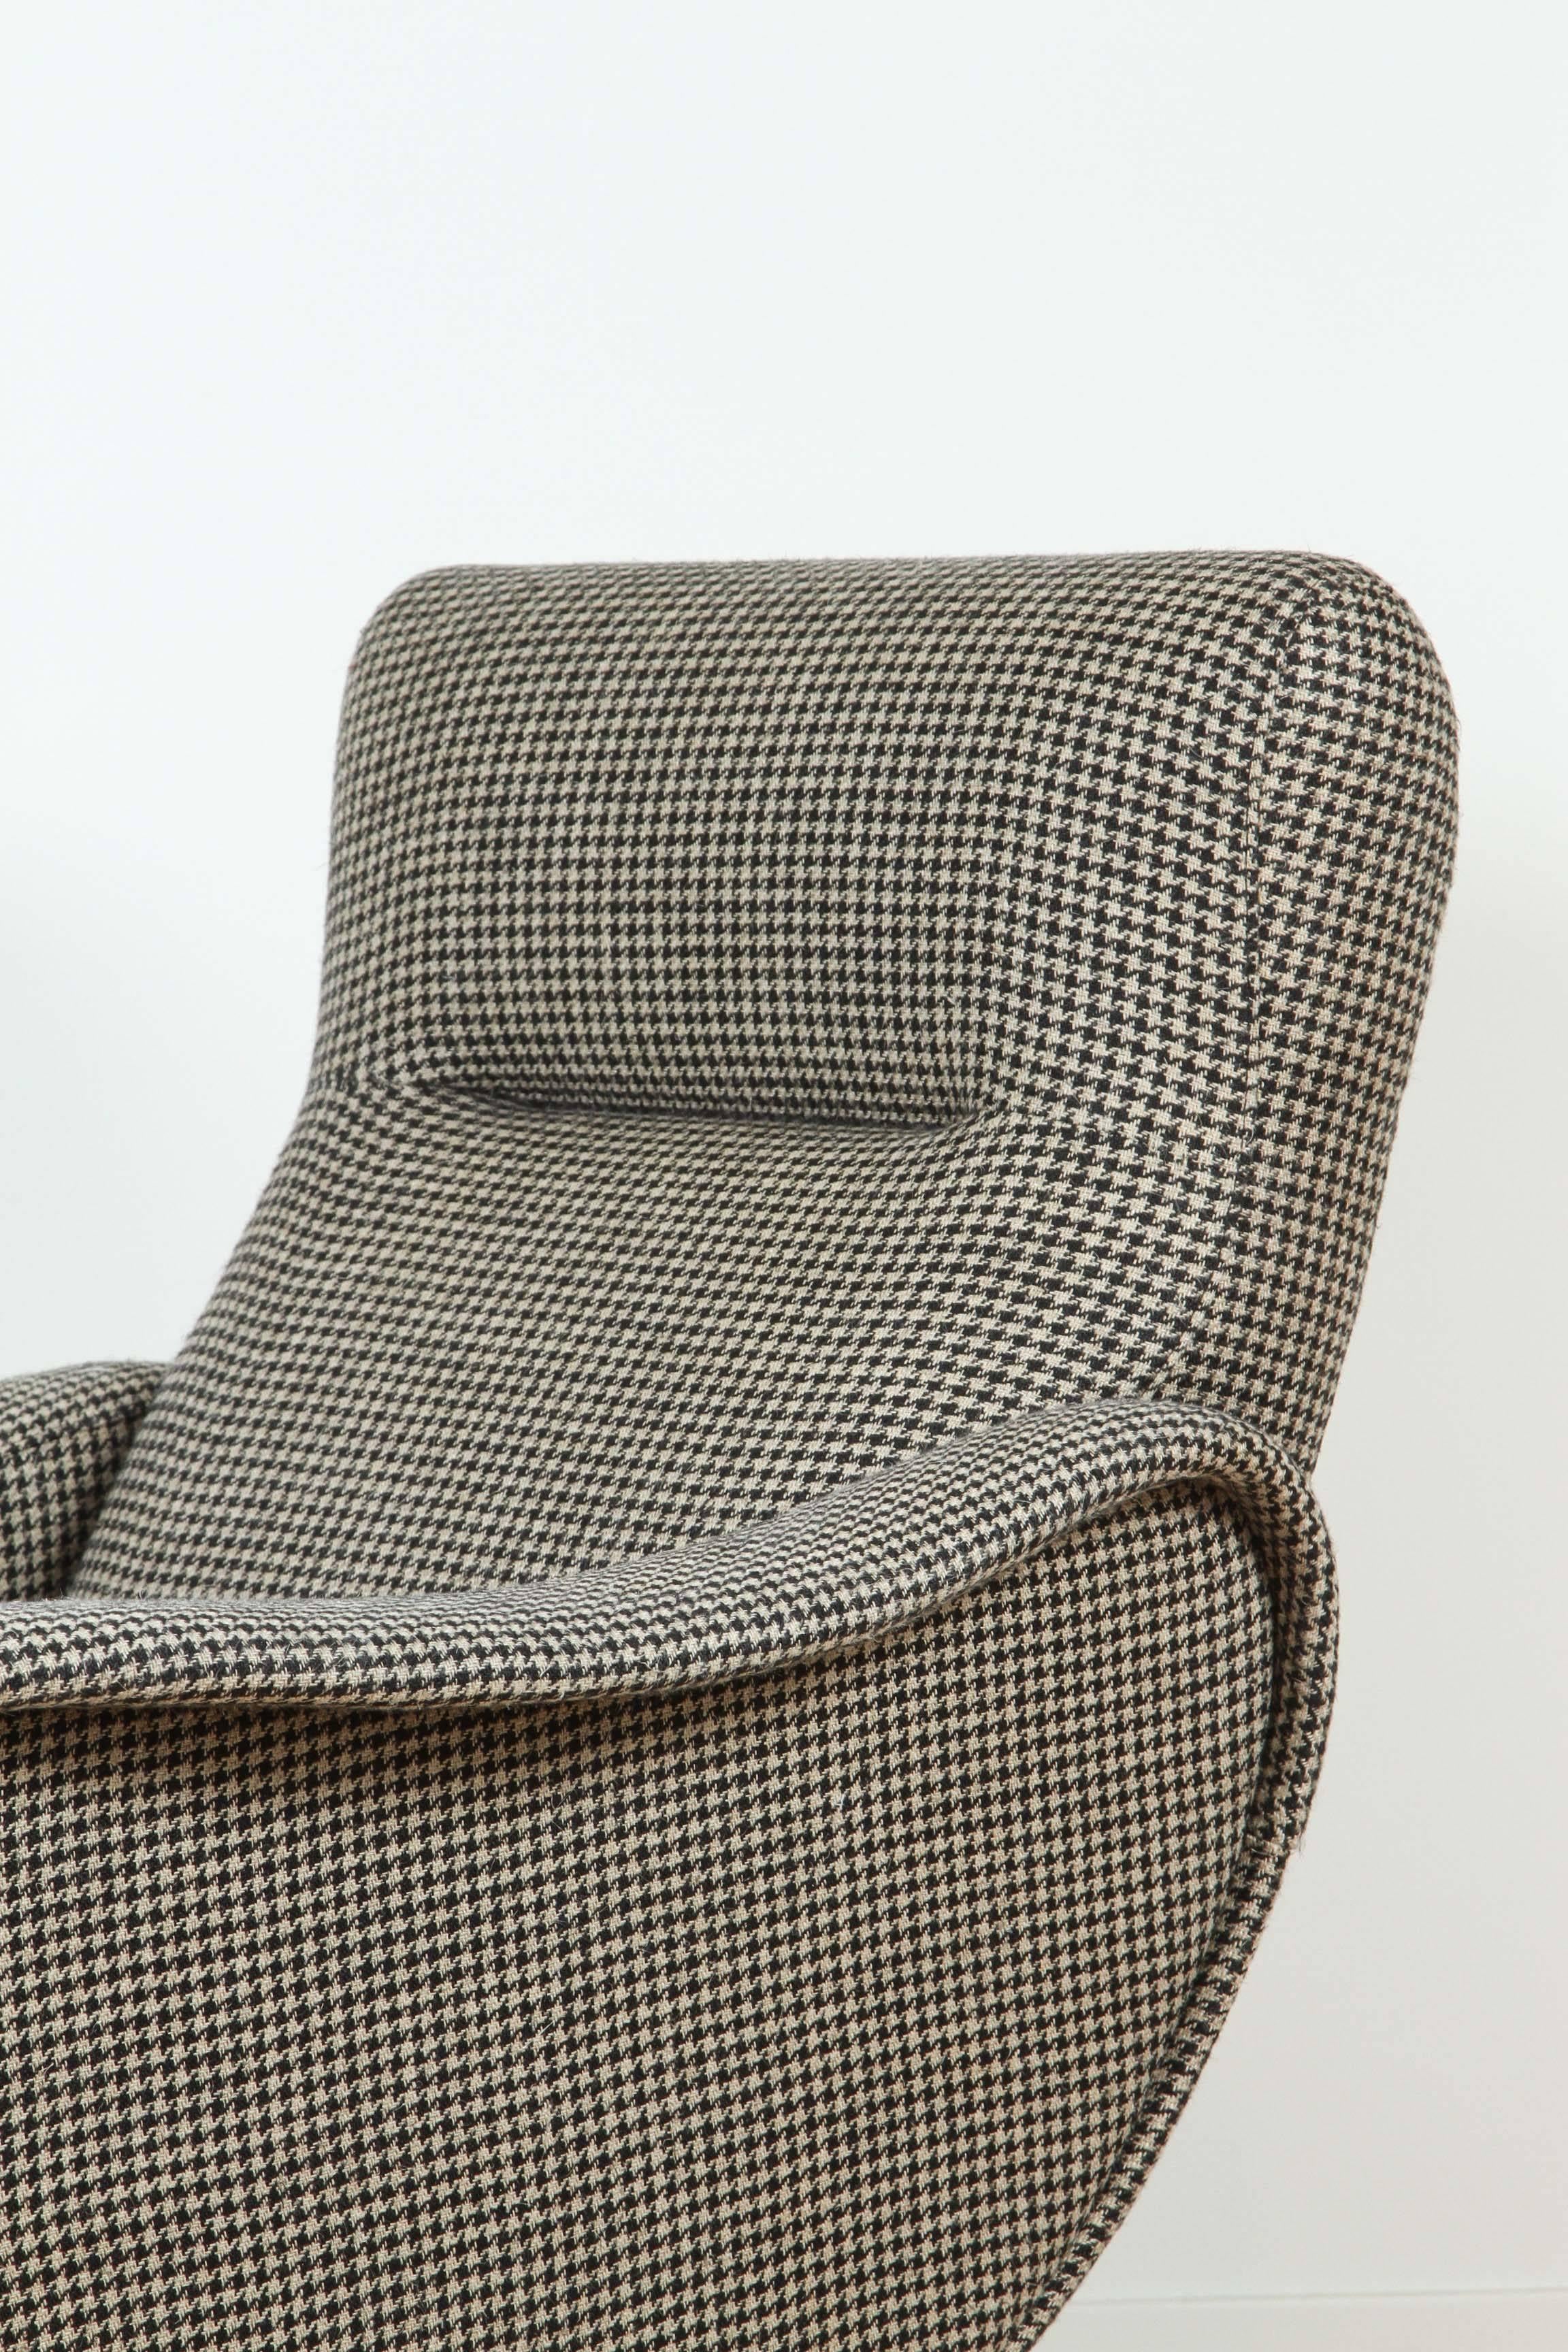 Pair of Italian Lounge Chairs Upholstered in Wool Houndstooth 2